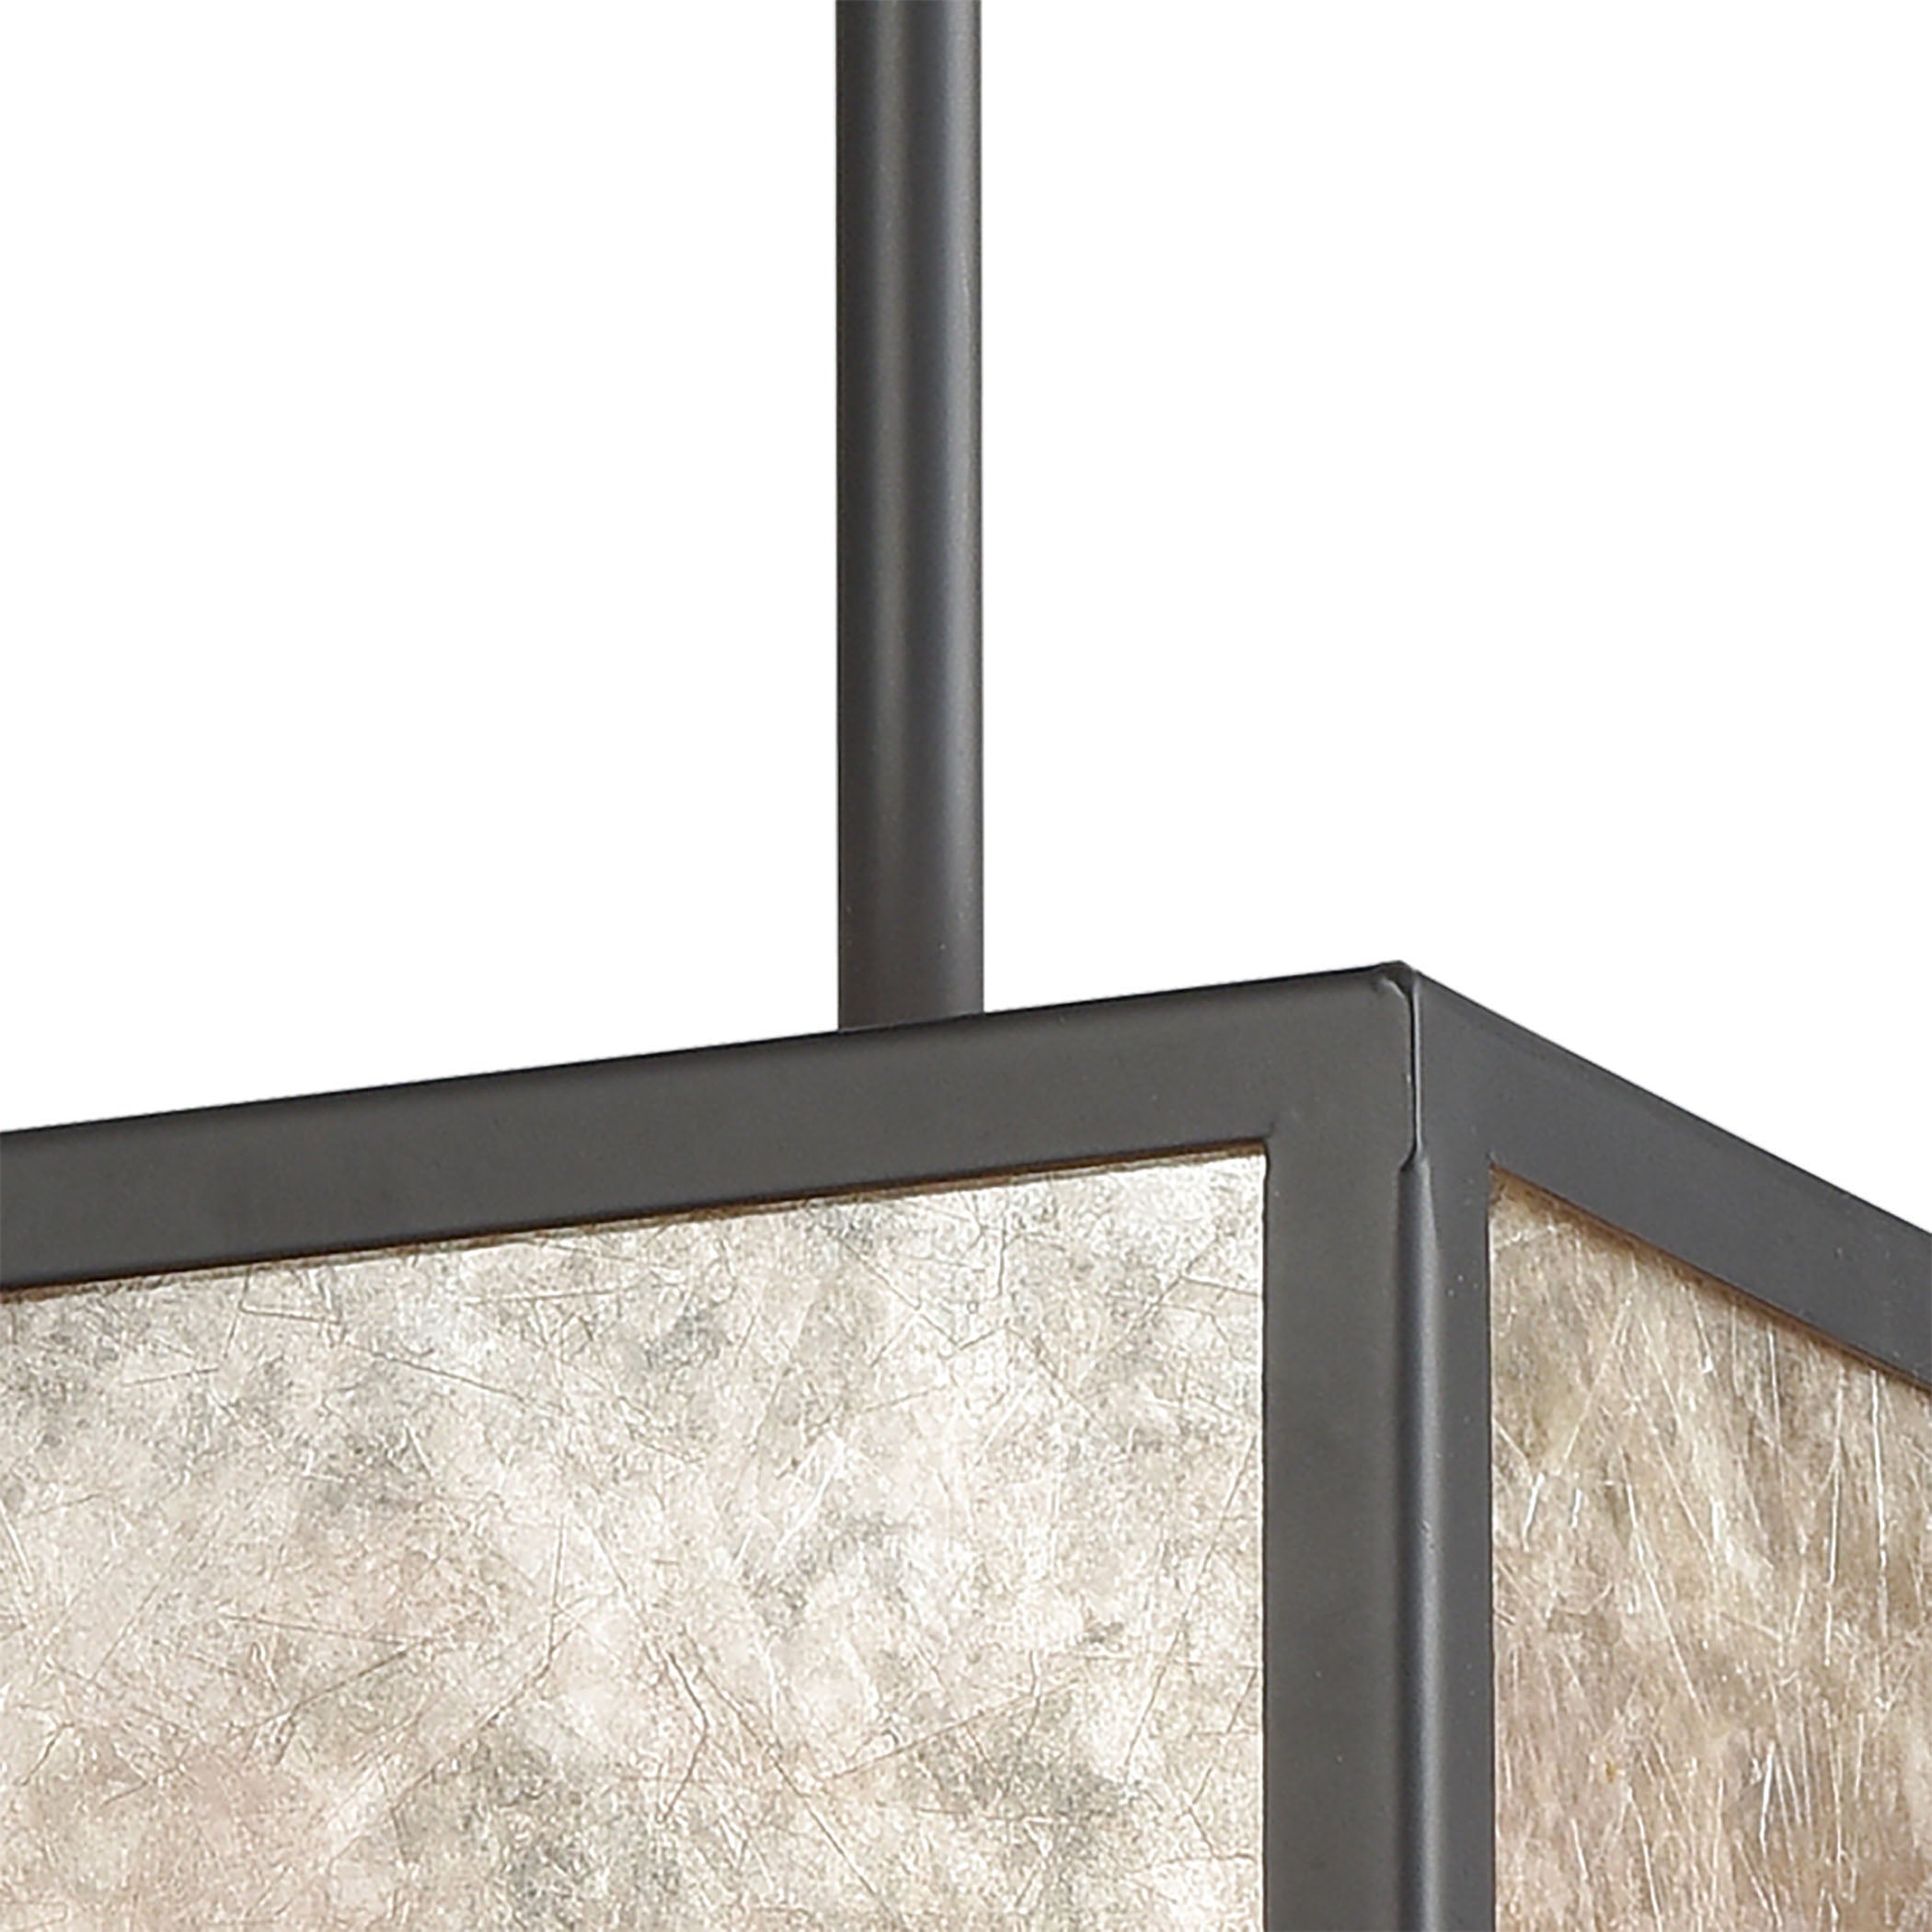 ELK Lighting 16182/1 Stasis 1-Light Mini Pendant in Oil Rubbed Bronze with Tan and Clear Mica Shade